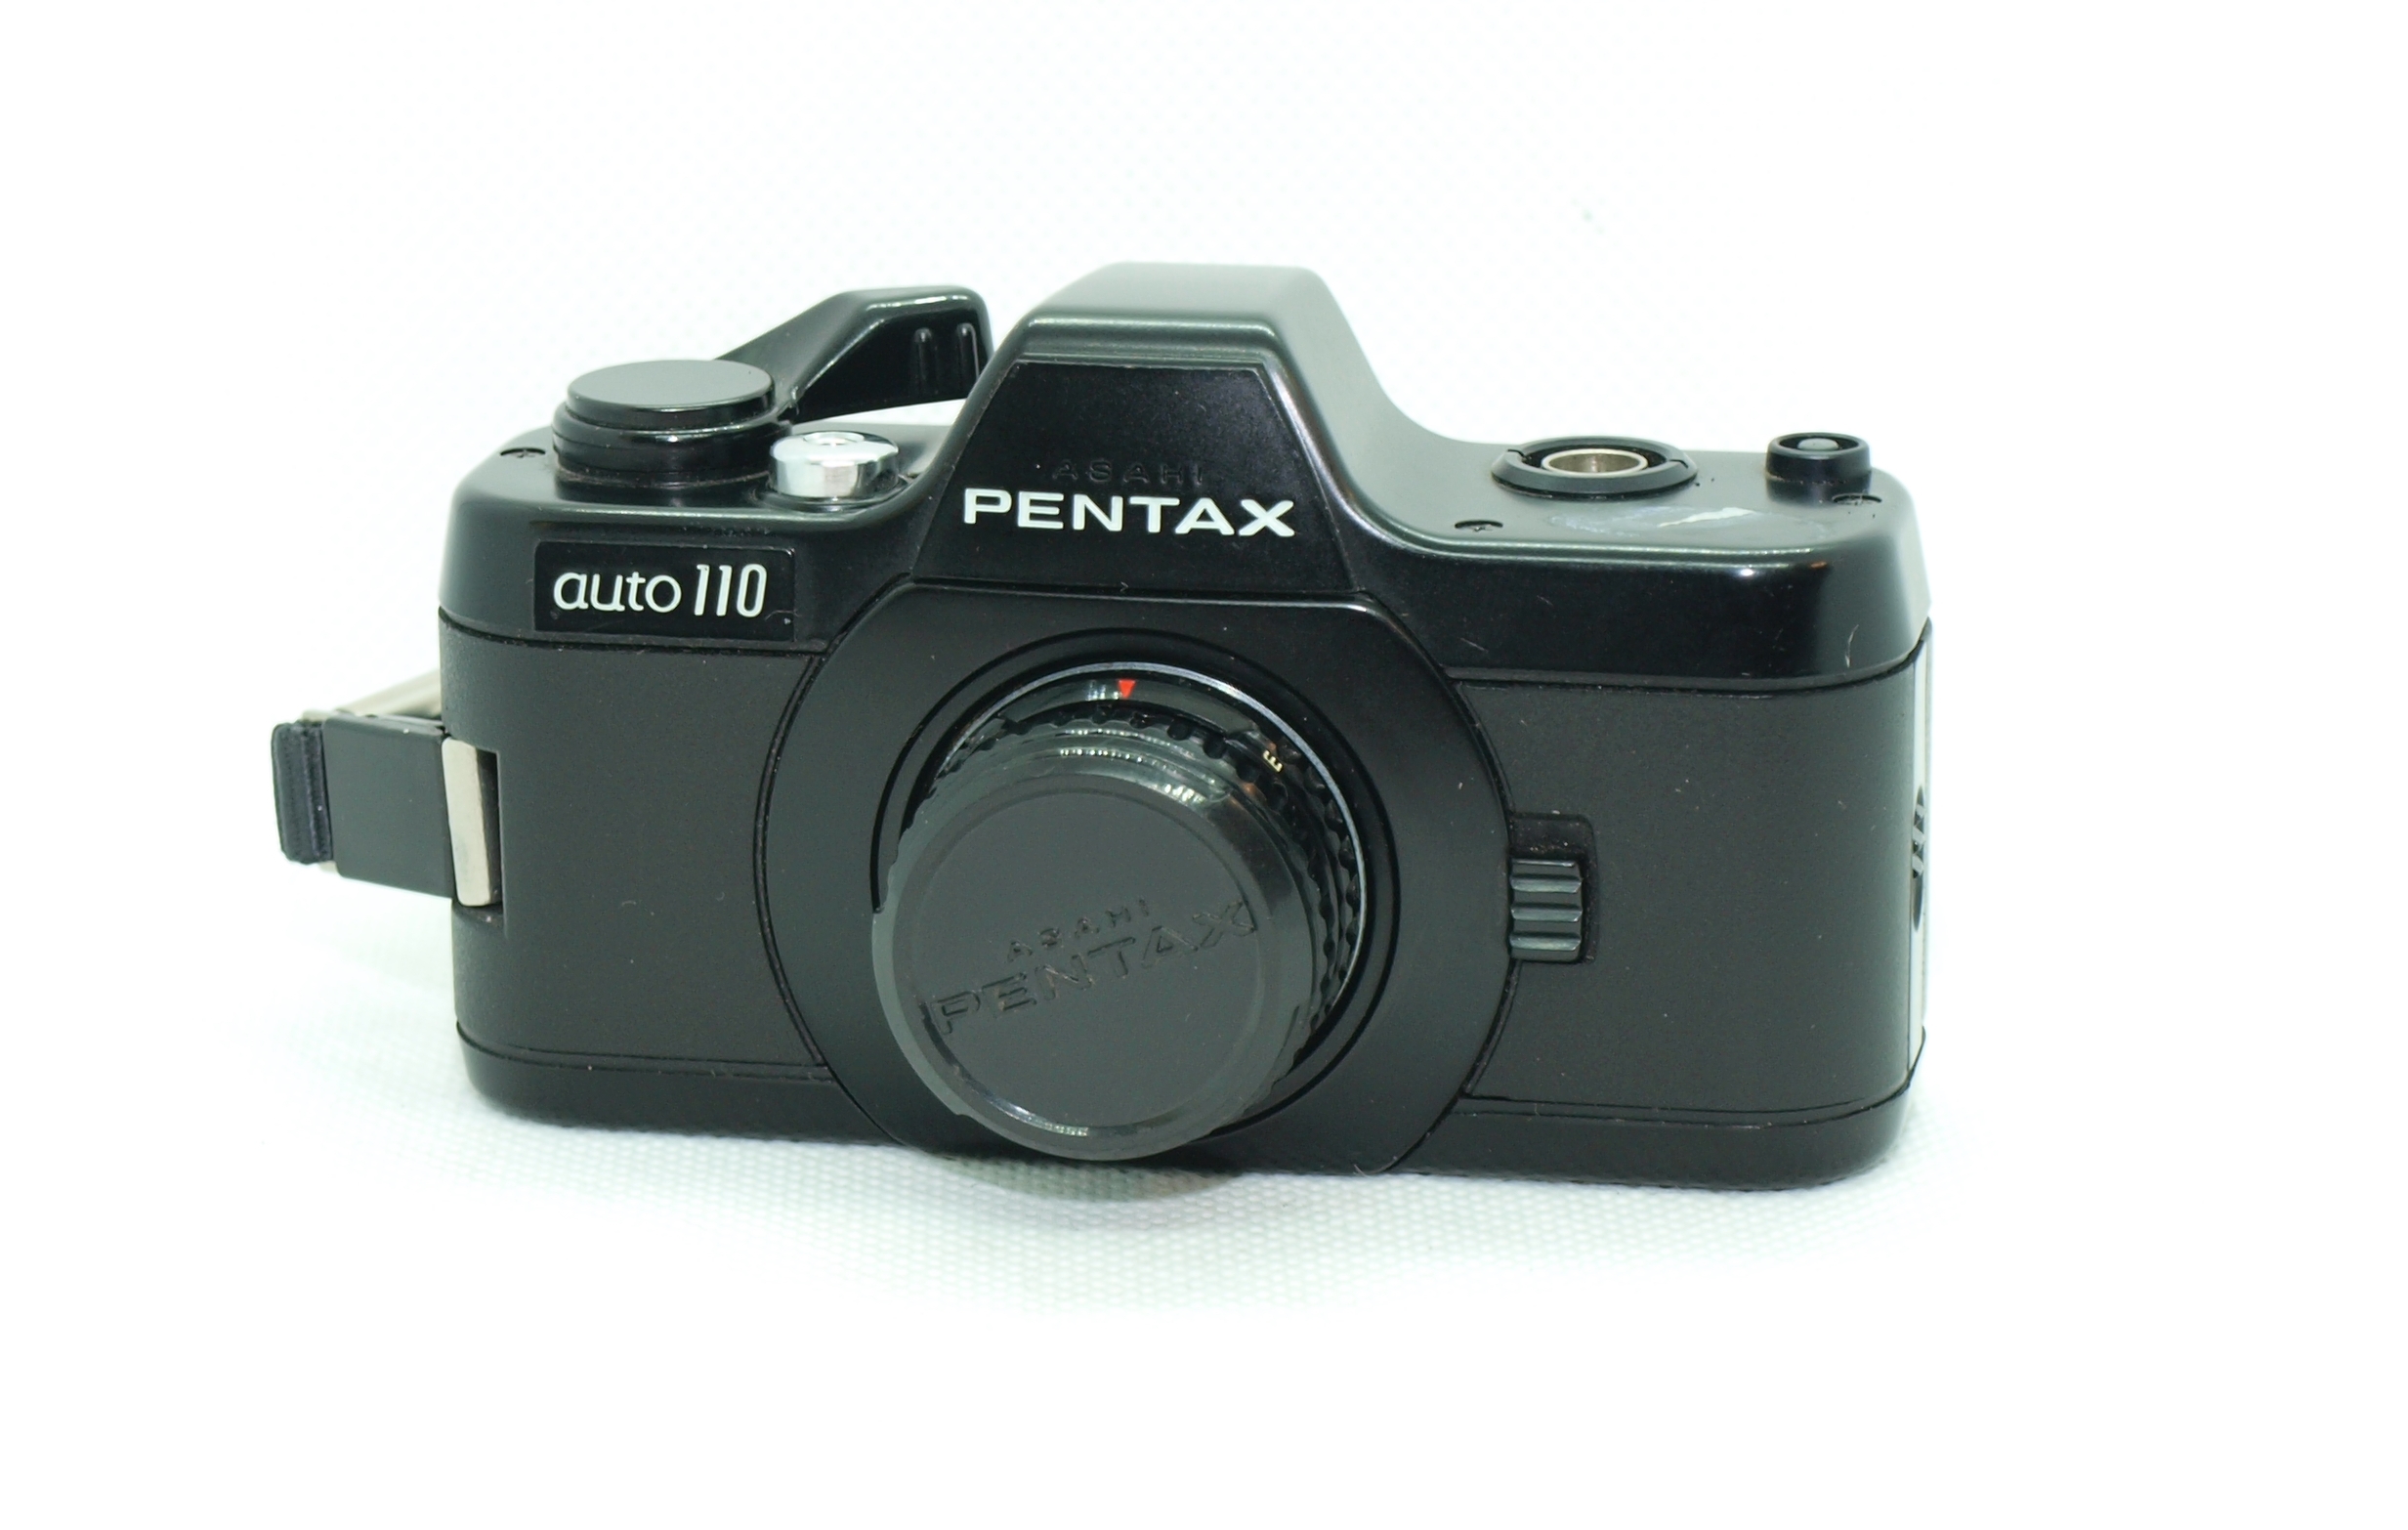 PENTAX AUTO 110 FILM CAMERA 1:2,8 24 mm Lens Good Condition - Vintage  Products and Items - Secure transaction by PayPal